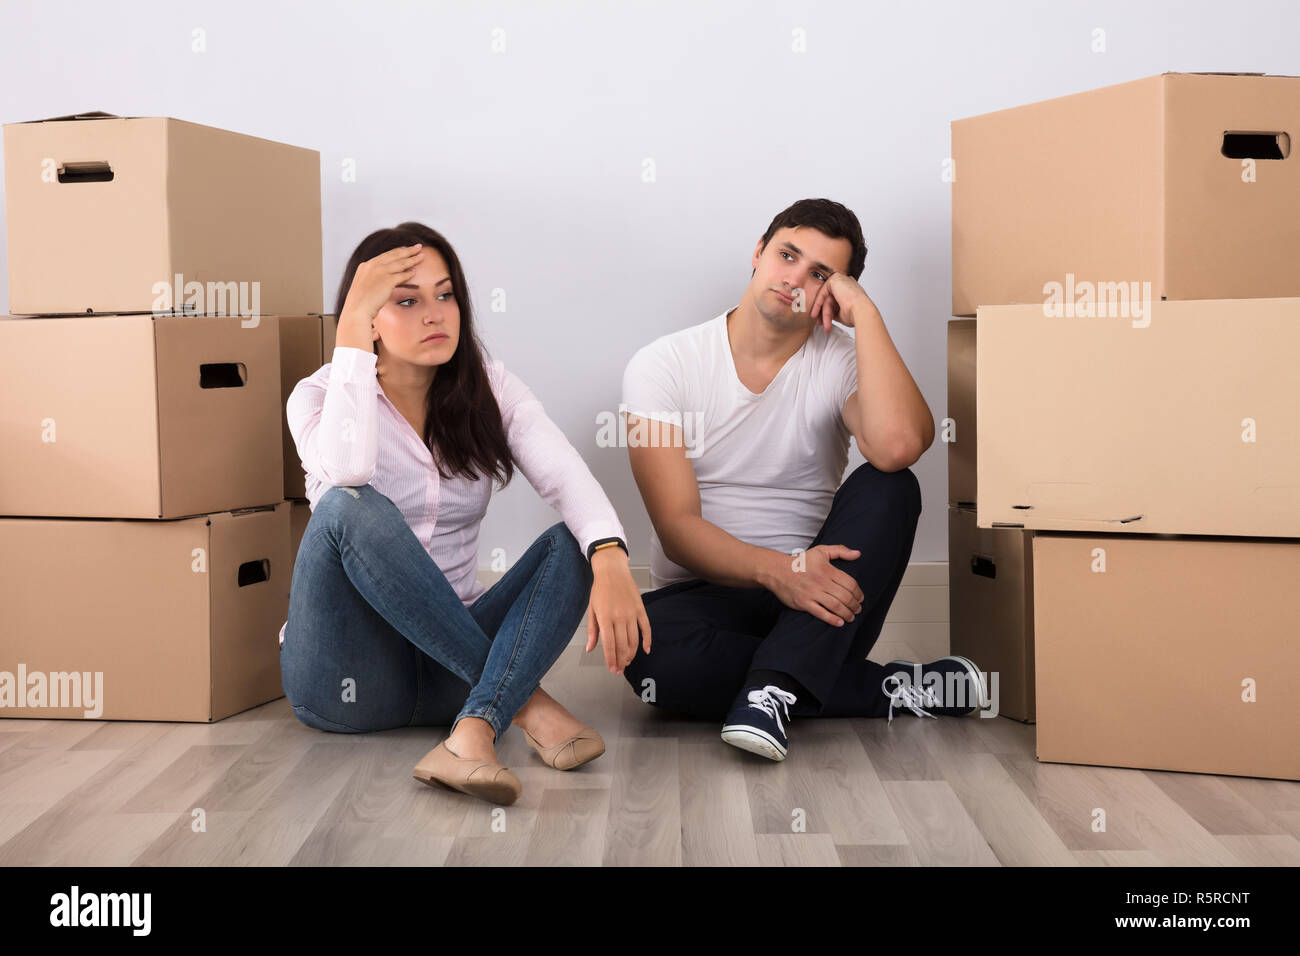 Worried Couple Sitting Near The Cardboard Boxes Stock Photo